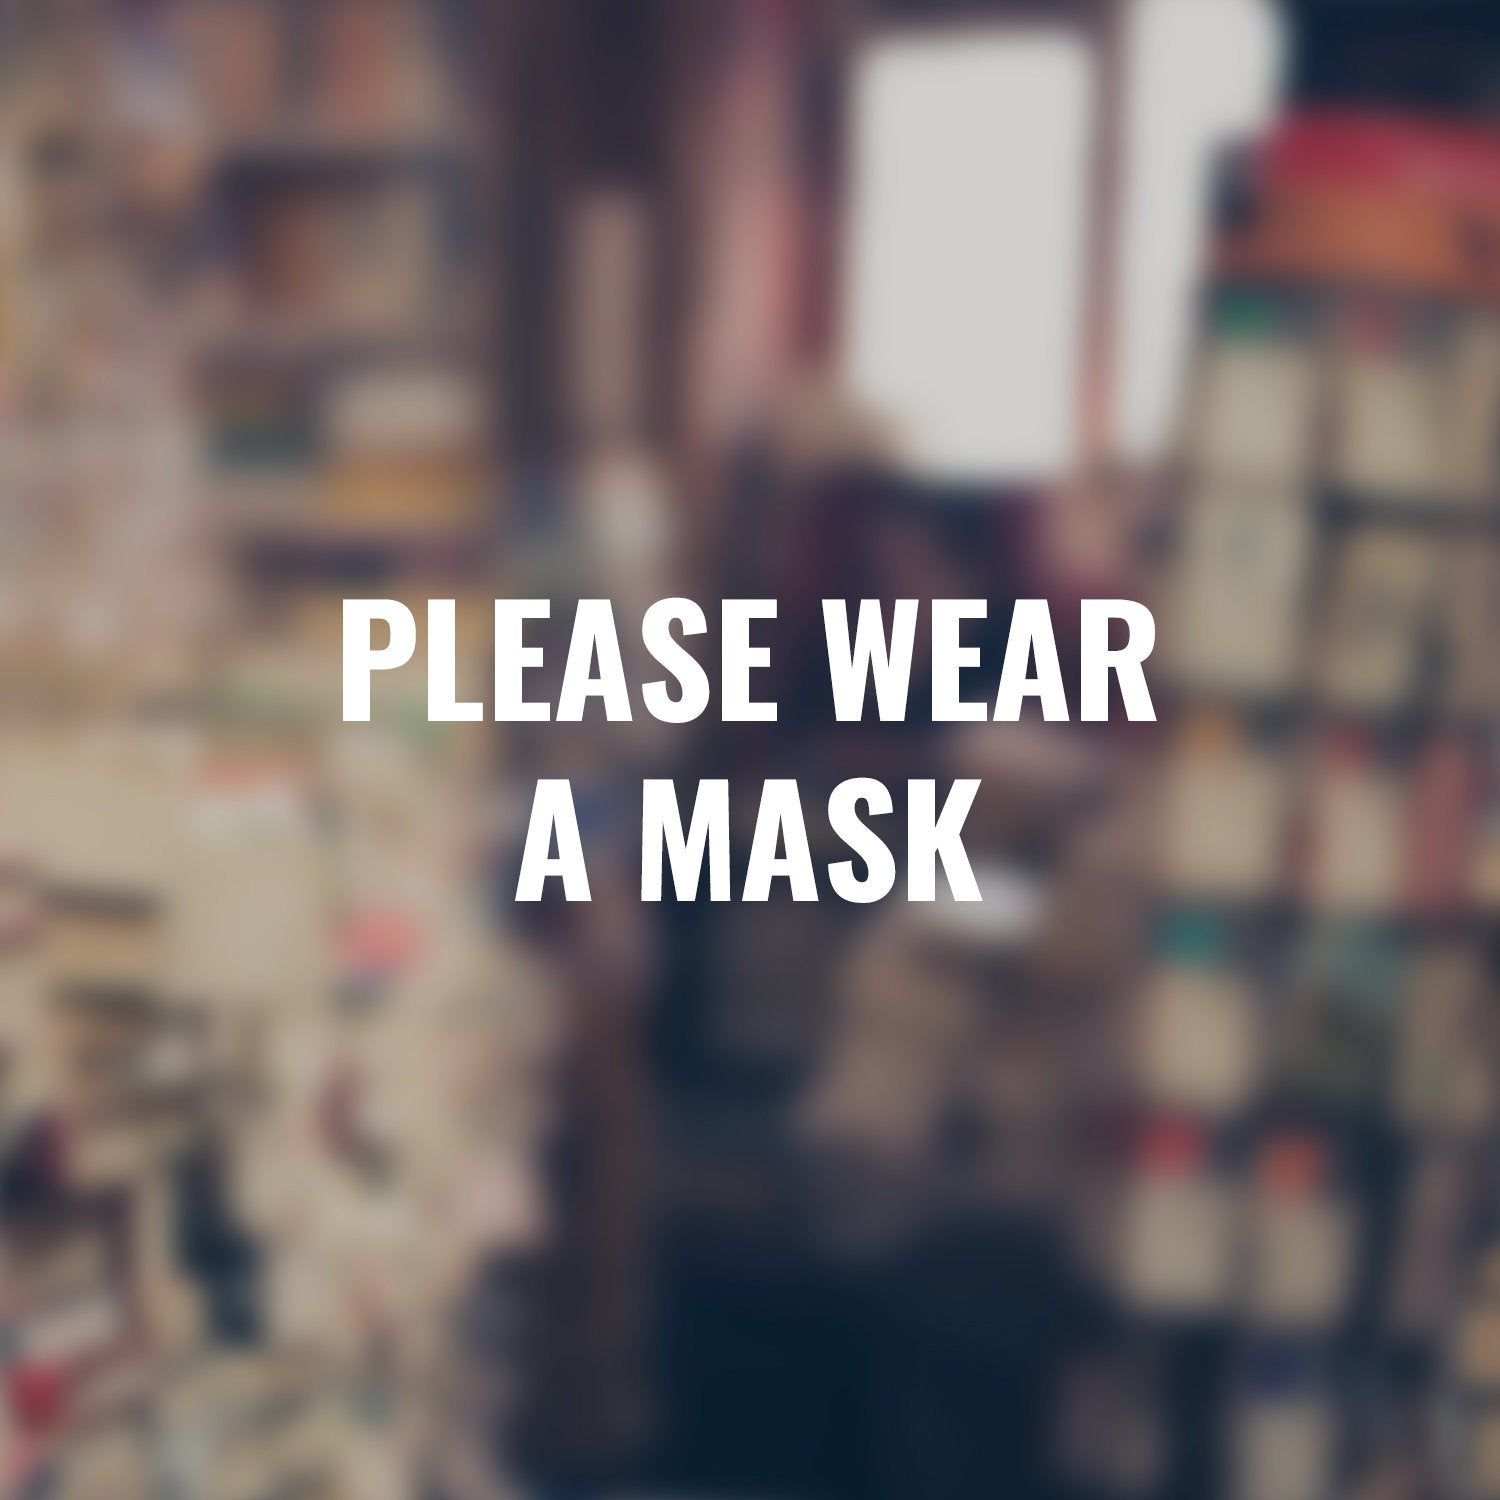 Please Wear a Mask - Face Mask Social Distancing Vinyl Decal for Windows, Doors, Walls of Small Businesses, Stores, Shops, and More!